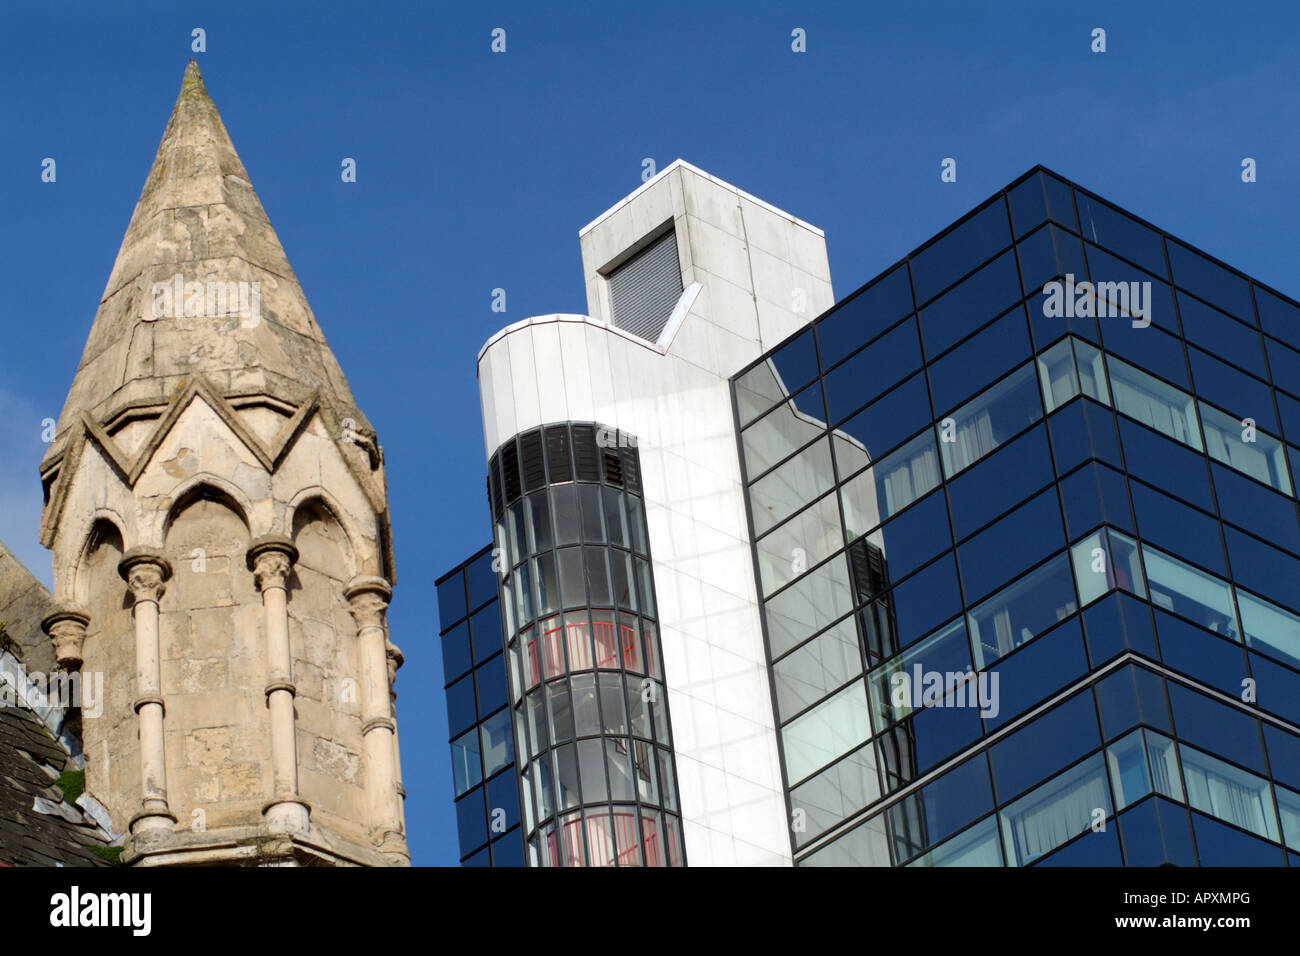 British Gas Office Building Cardiff South Wales and an Old Church Spire Stock Photo